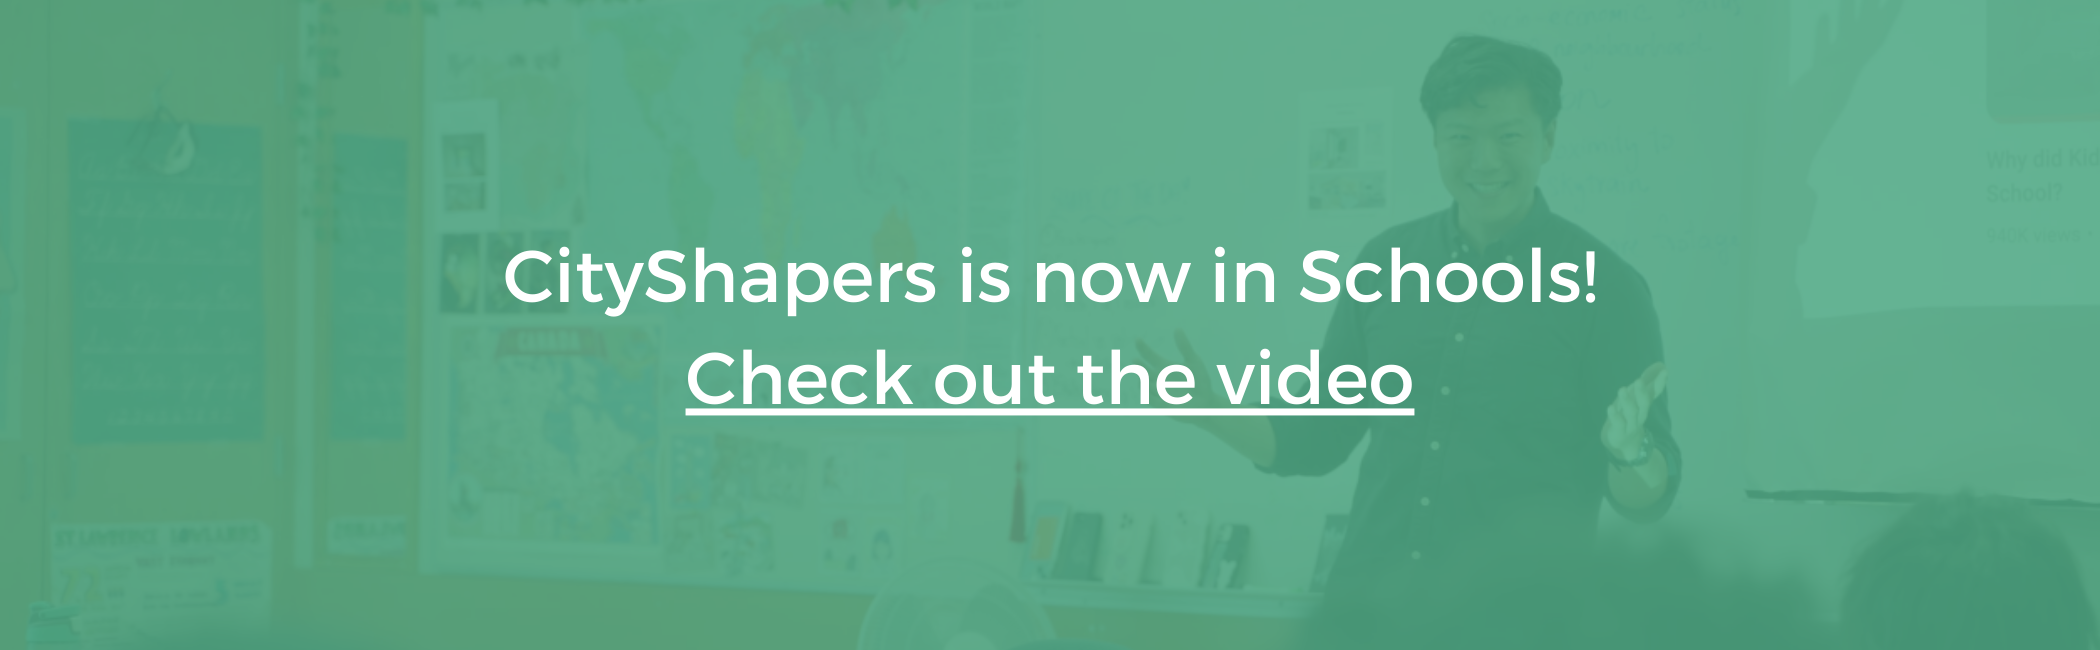 White text on teal background that reads "CityShapers in now in schools. Check out the video". In the background there is a man speaking at the front of a class.